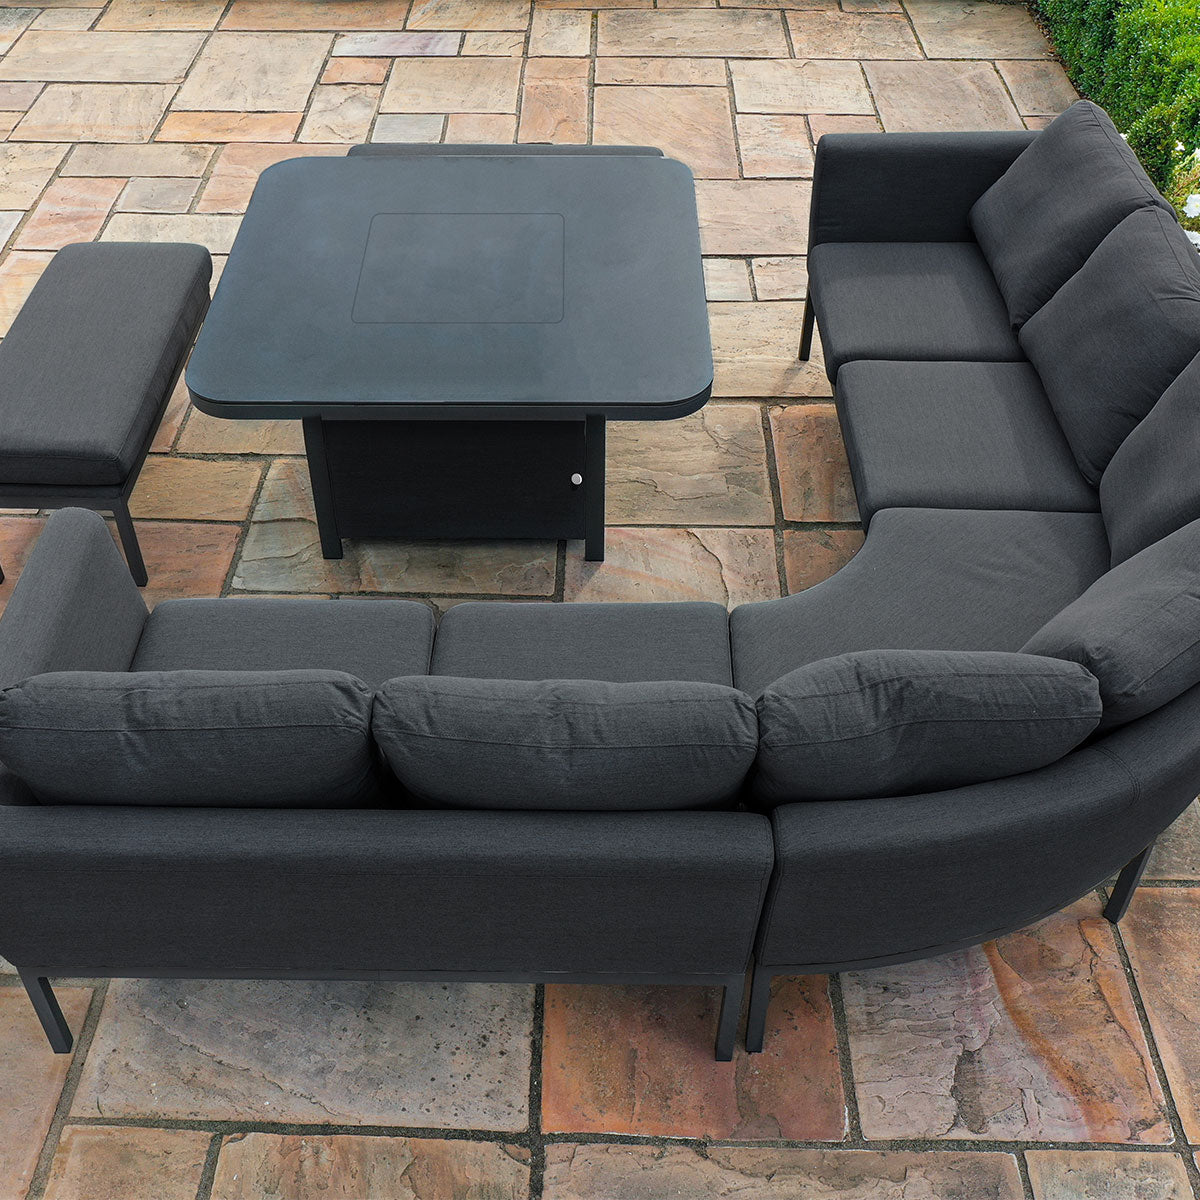 Maze - Outdoor Fabric Pulse Deluxe Square Corner Dining Set with Firepit Table - Charcoal